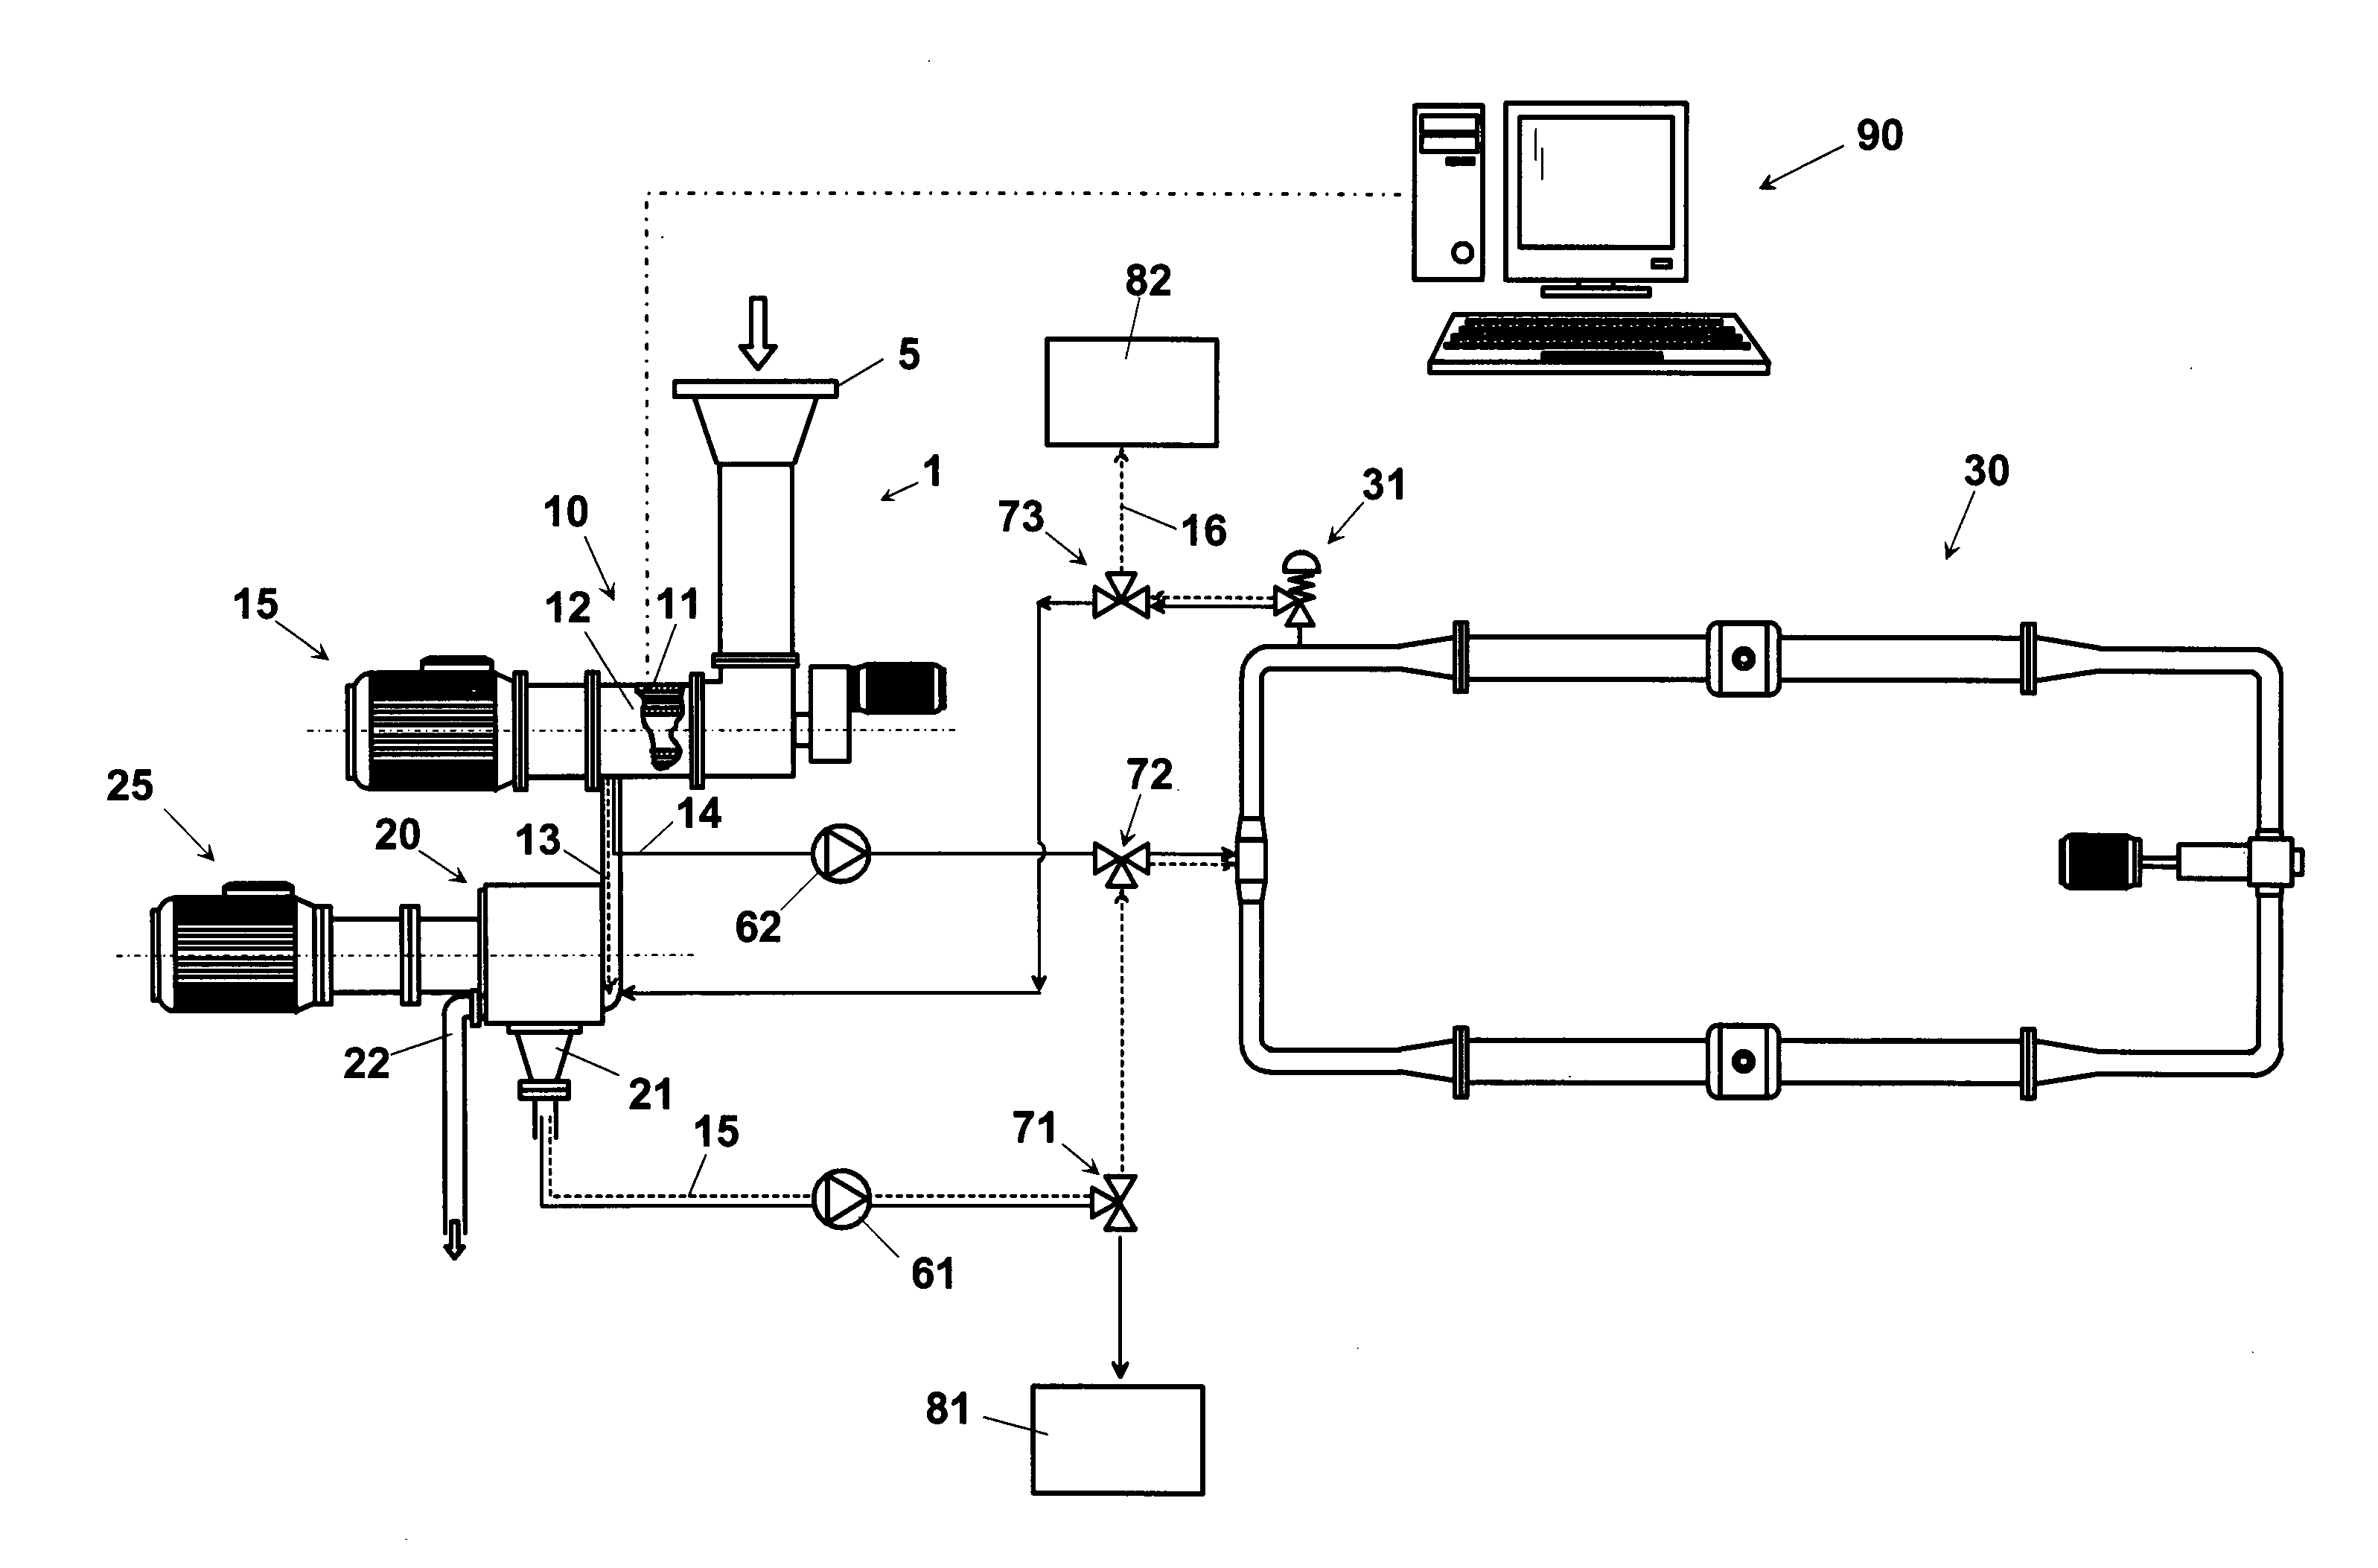 Method and apparatus for extracting puree or juice from a vegetable or animal food